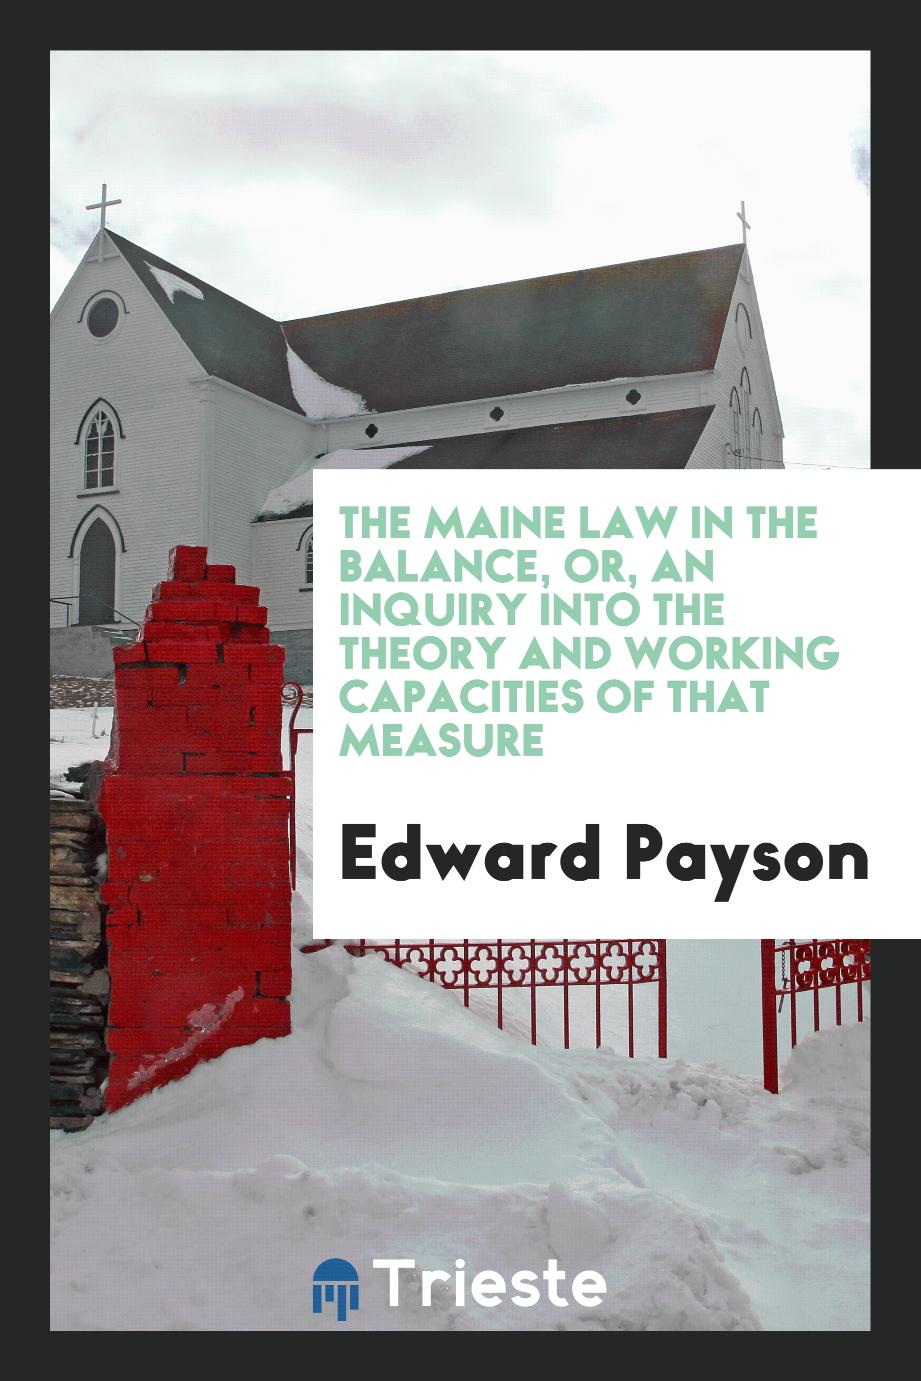 The Maine Law in the Balance, Or, An Inquiry Into the Theory and Working Capacities of that Measure